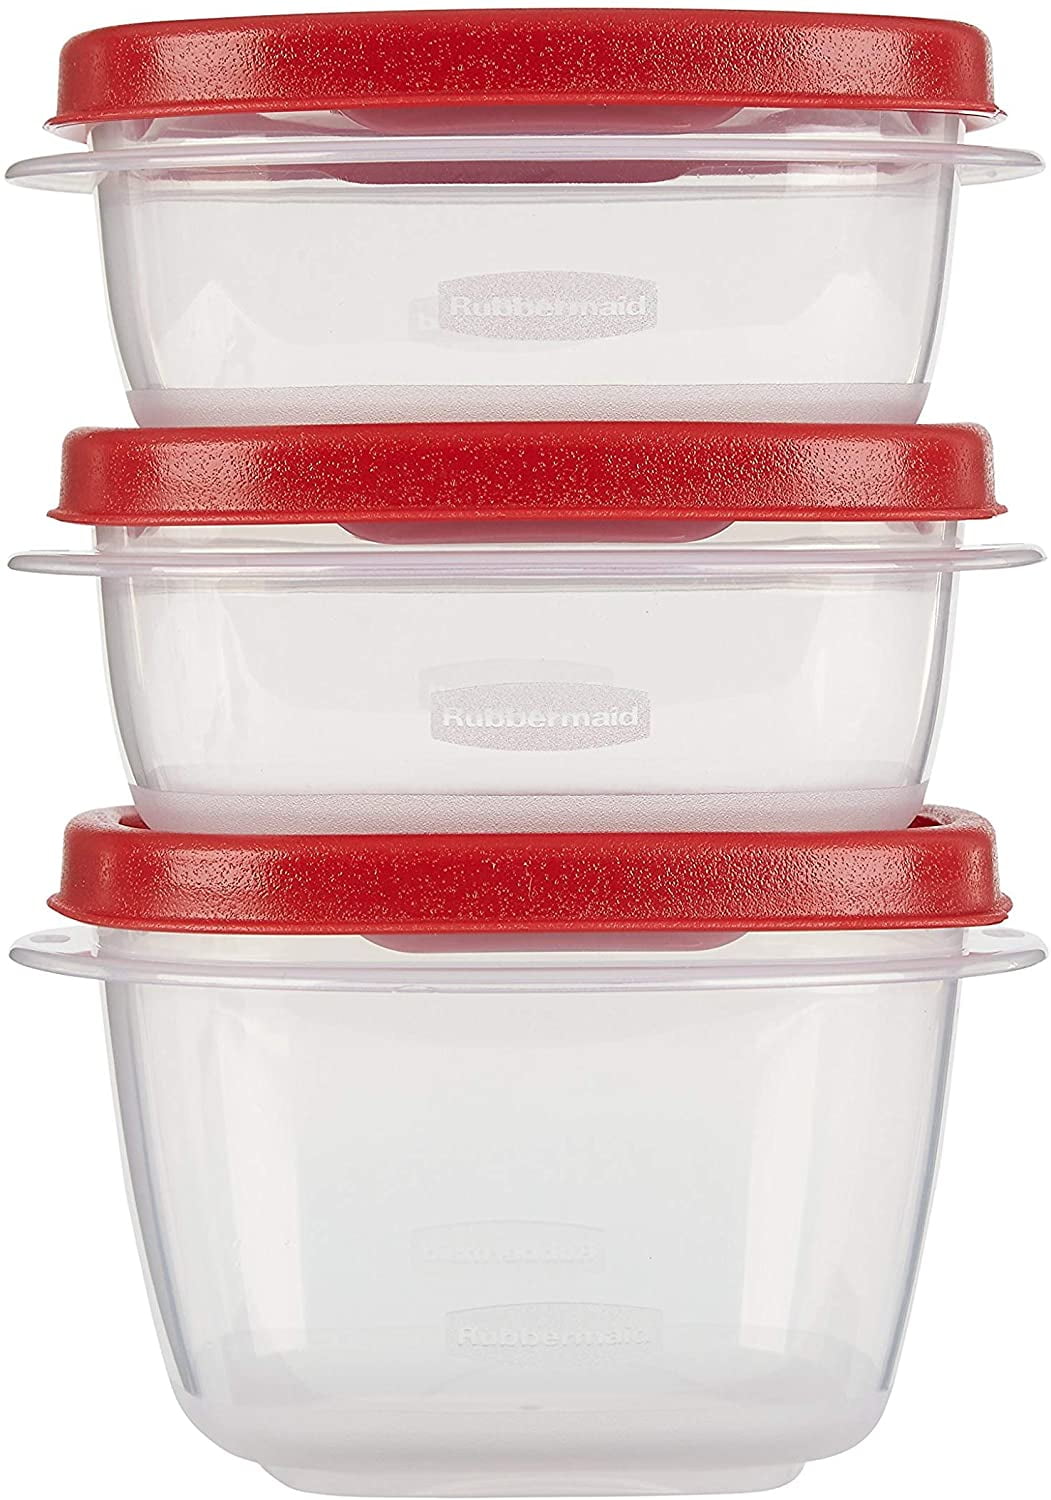 Rubbermaid® Easy Find Lids™ Food Storage Containers Set, 24 pc - Kroger